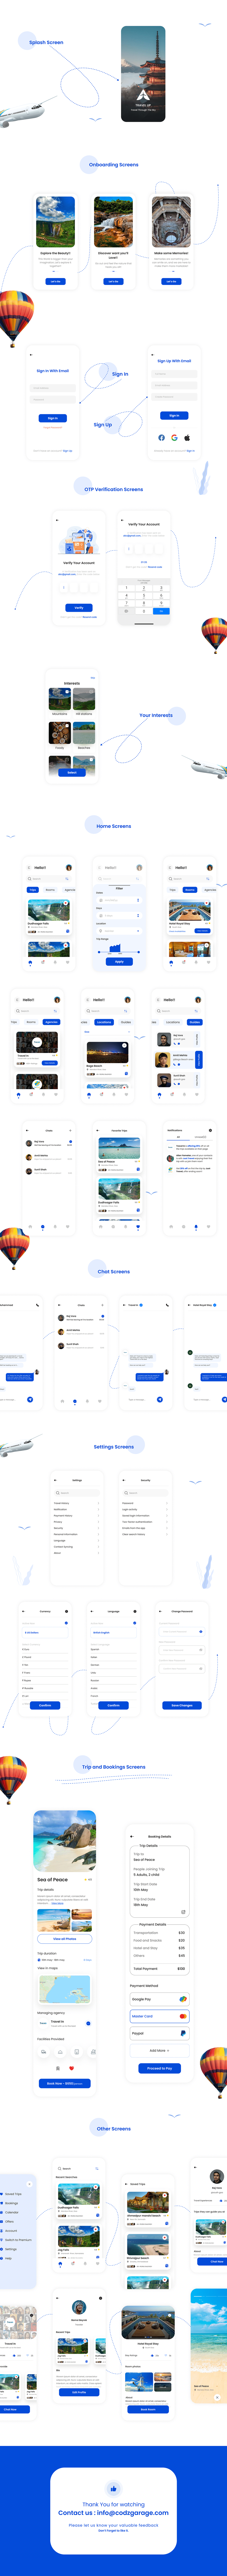 Travel Travel App Figma UI/UX app design bookings hotel brand identity vacation tourism